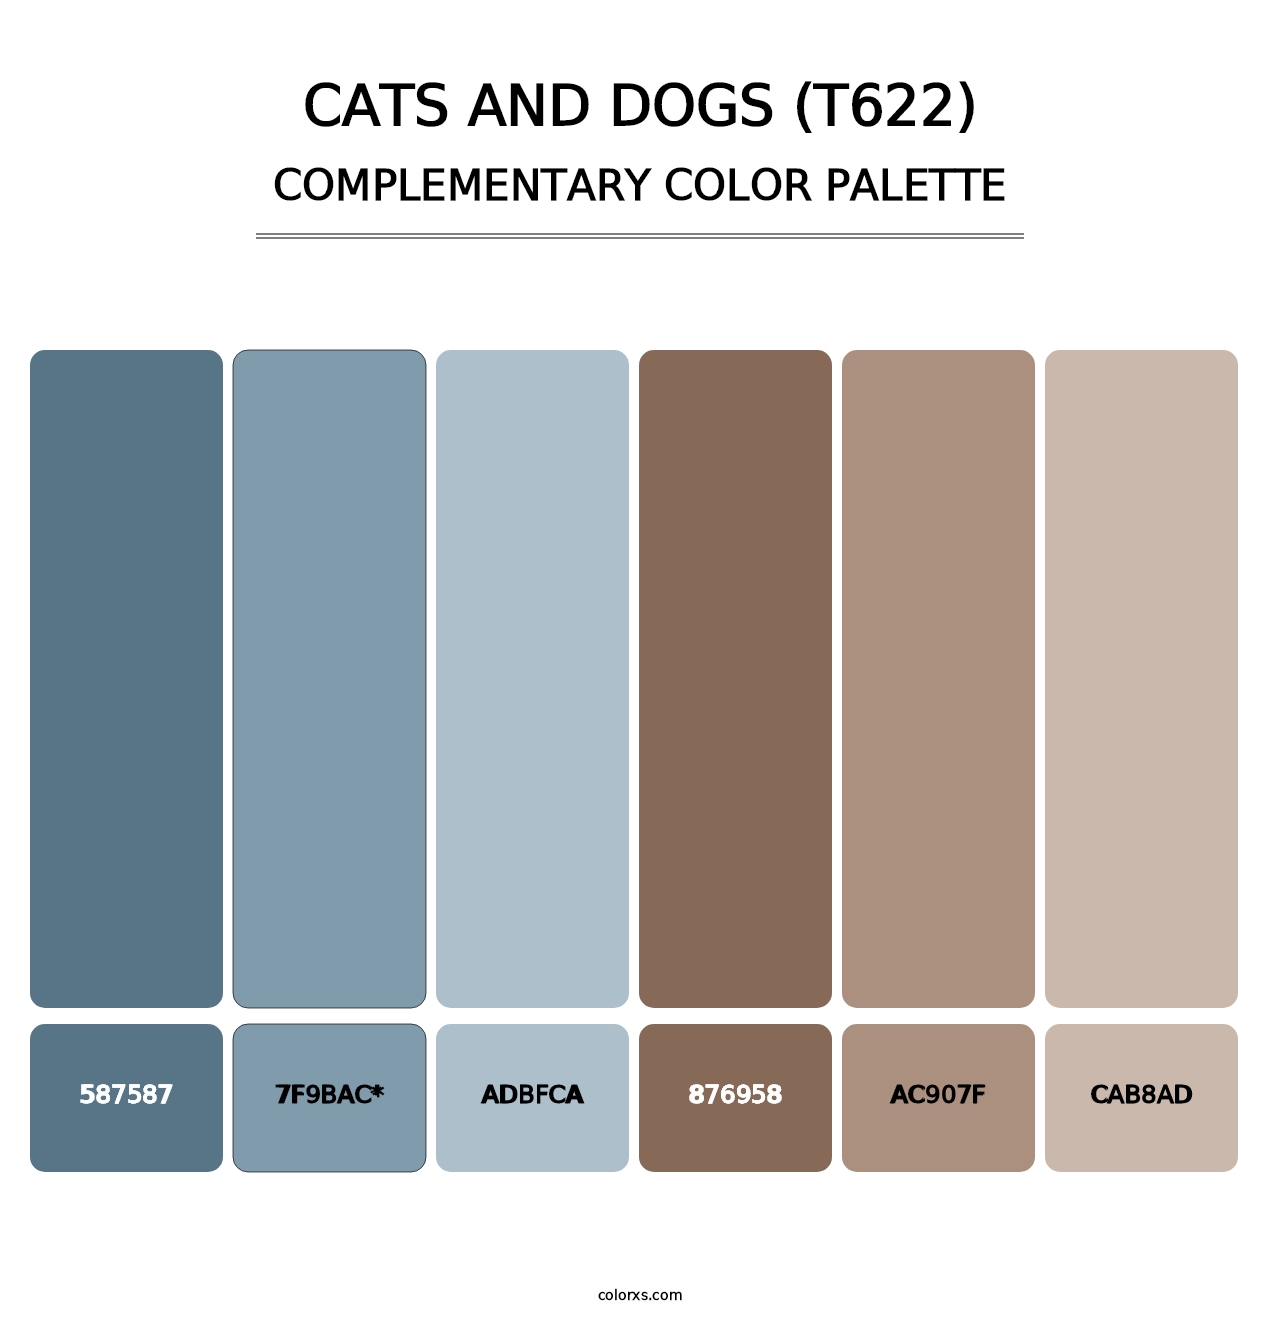 Cats and Dogs (T622) - Complementary Color Palette